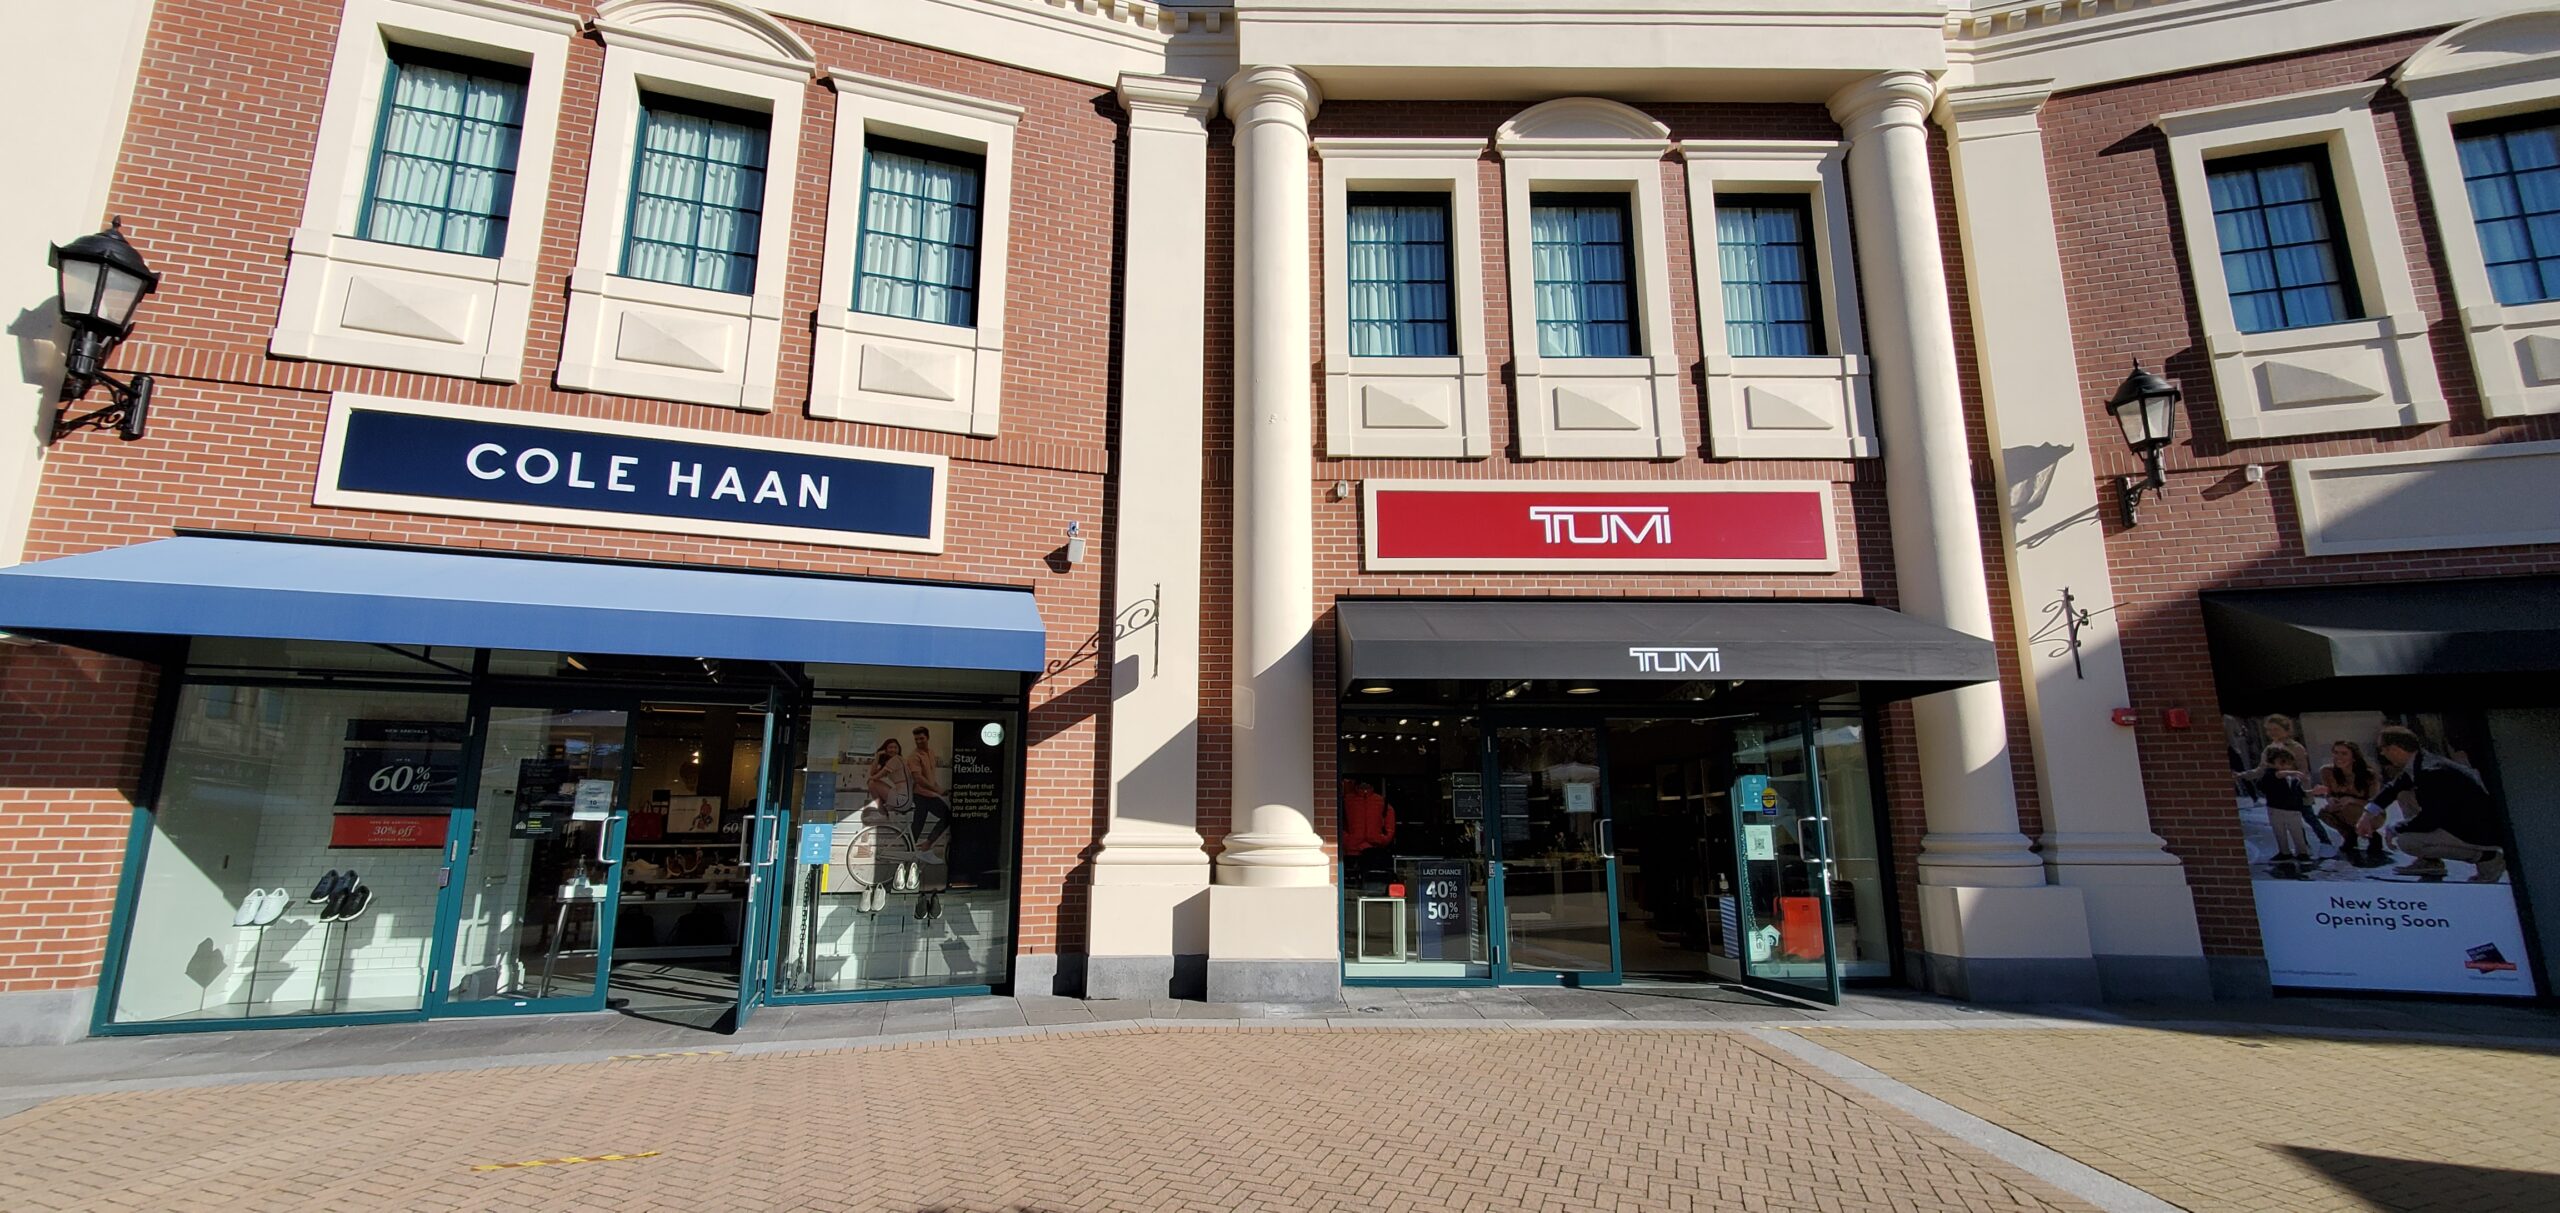 Cole Haan and TUMI at McArthur Glen Vancouver